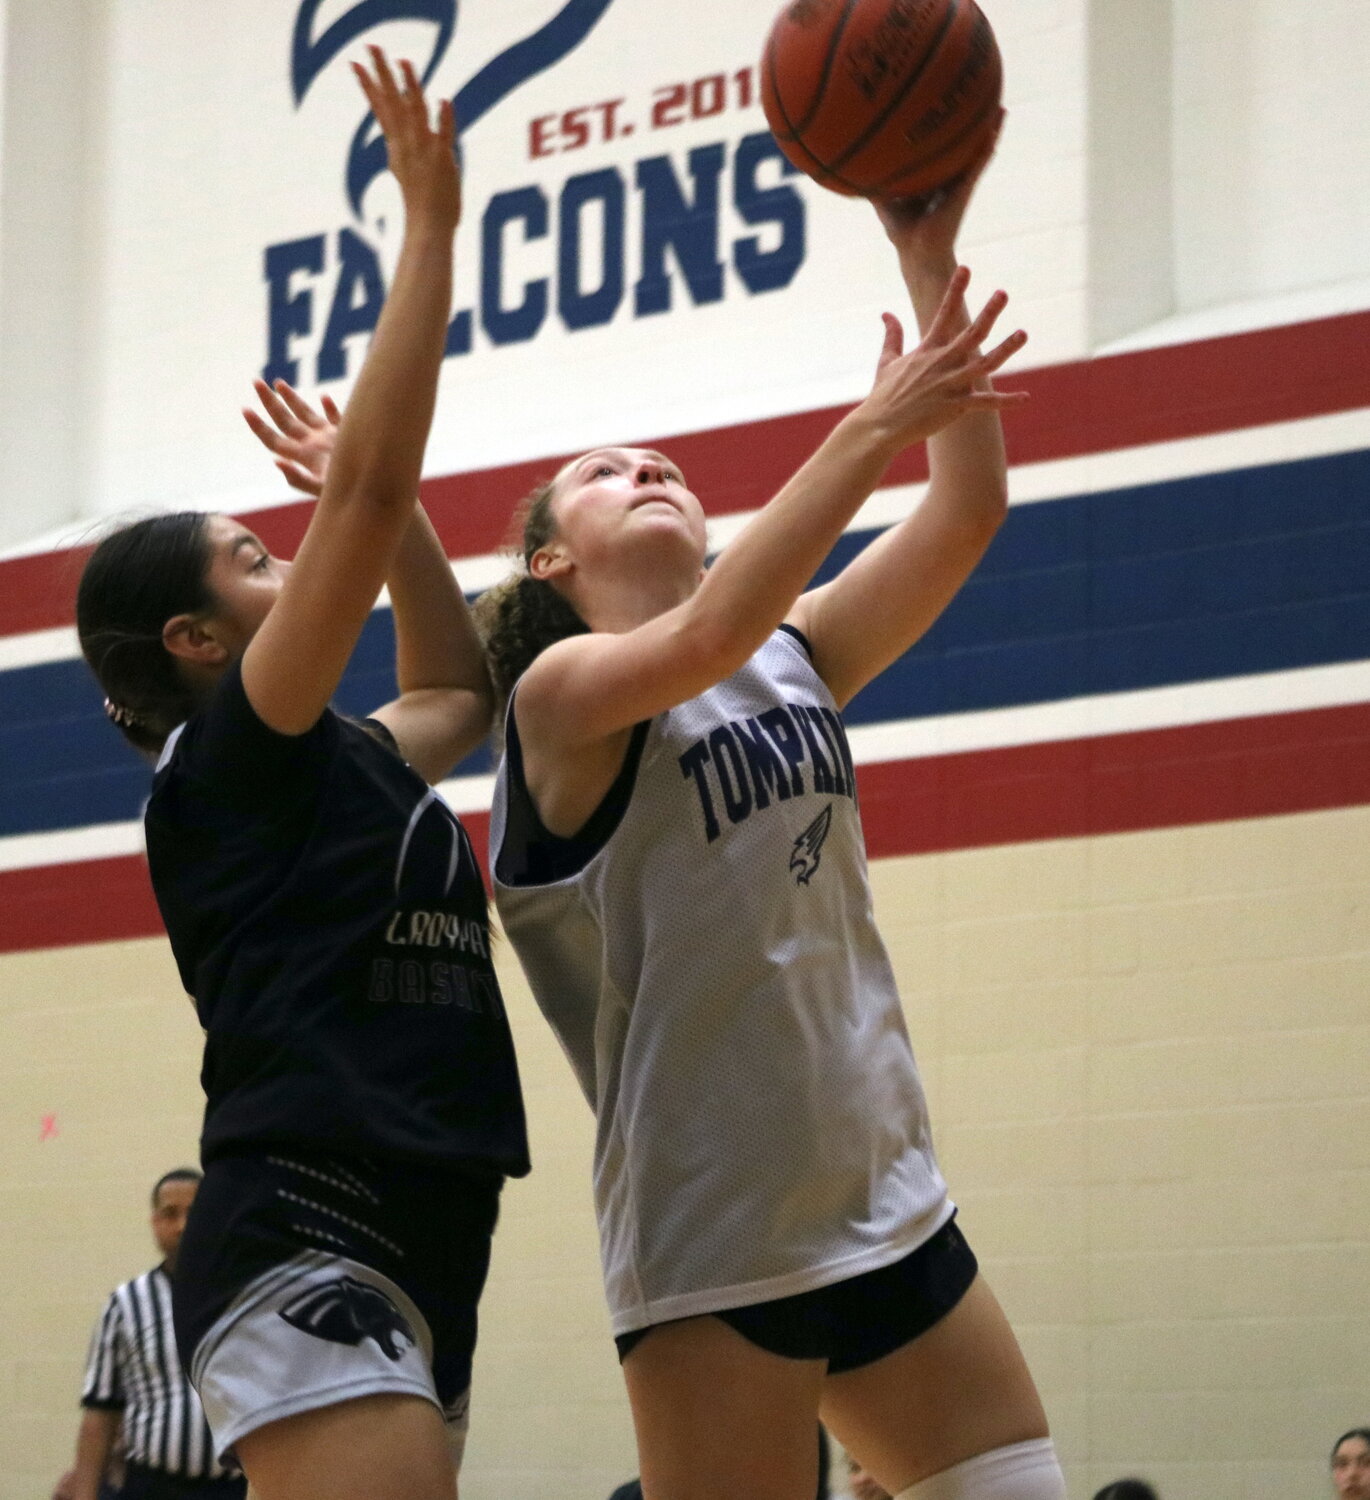 Gabby Painter drives to the basket during Thursday's game between Tompkins and Laredo United South defenders at the Tompkins gym.